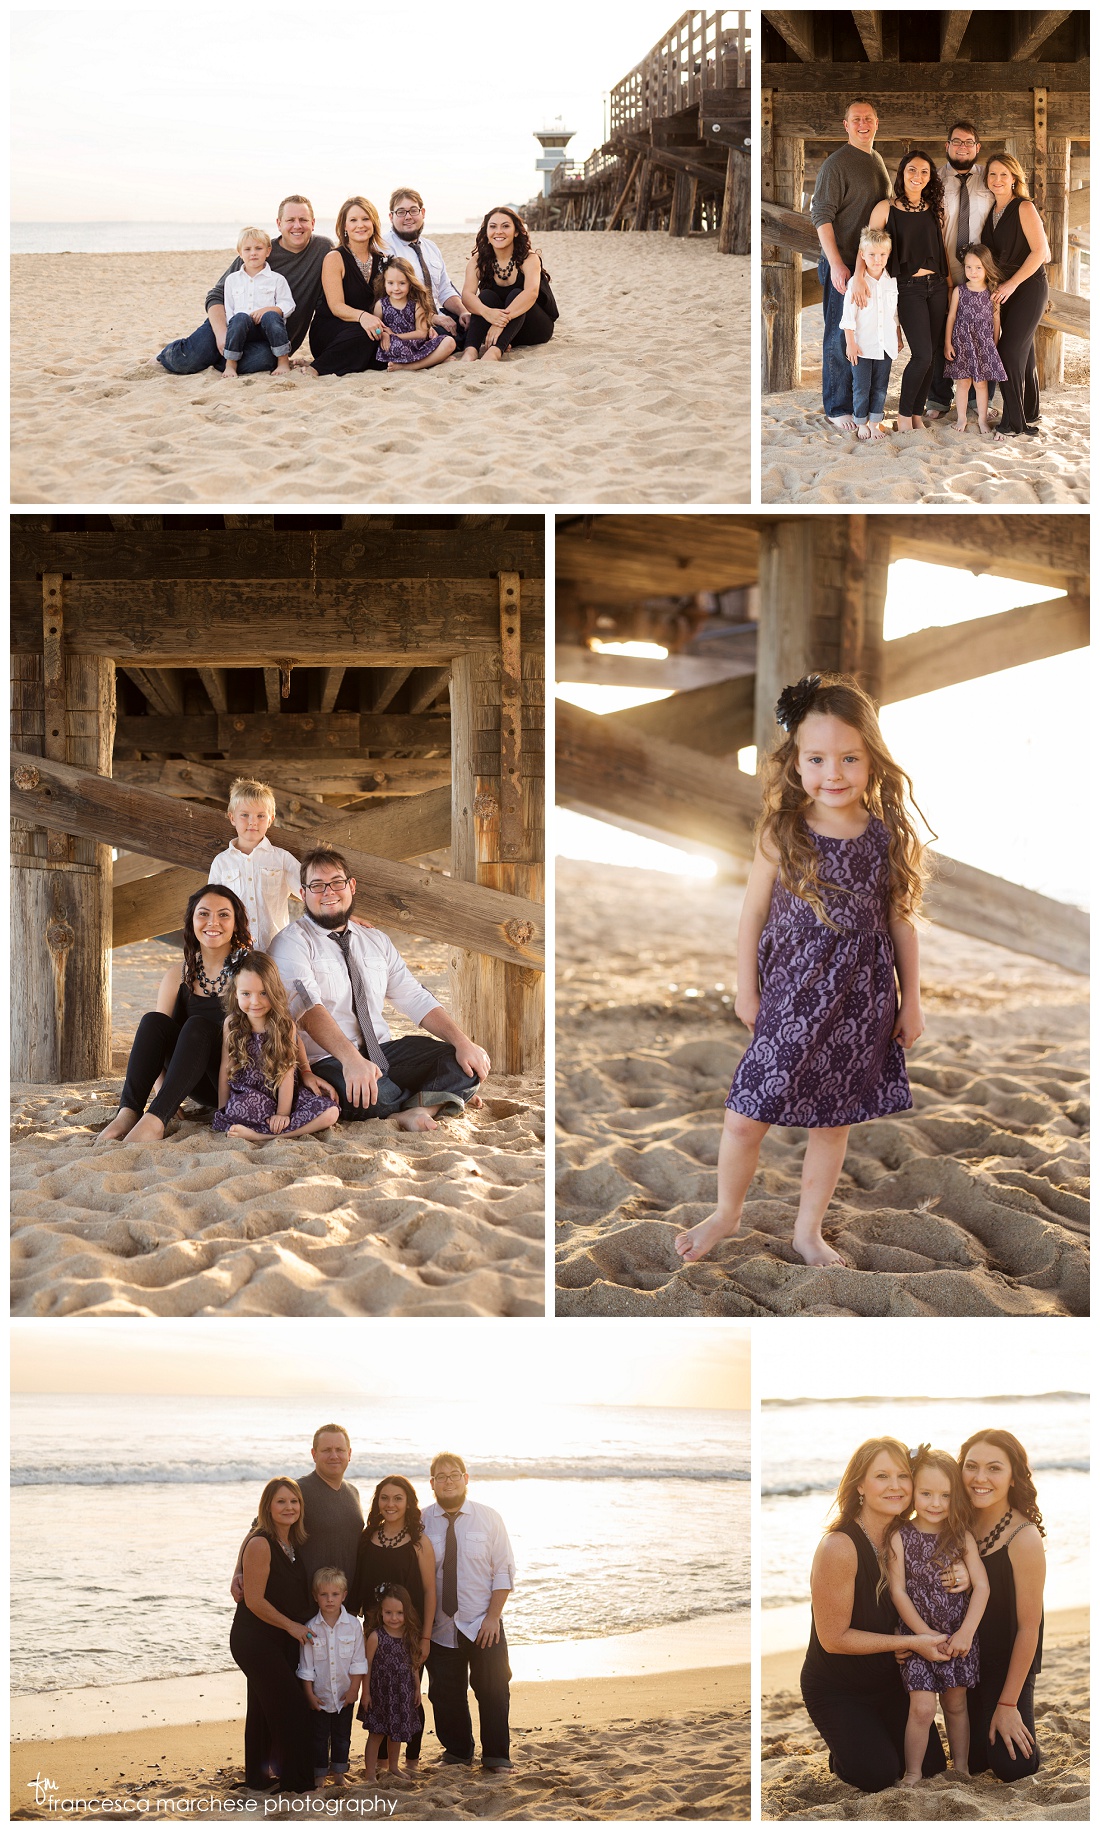 Family photography session at the beach - Francesca Marchese Photography